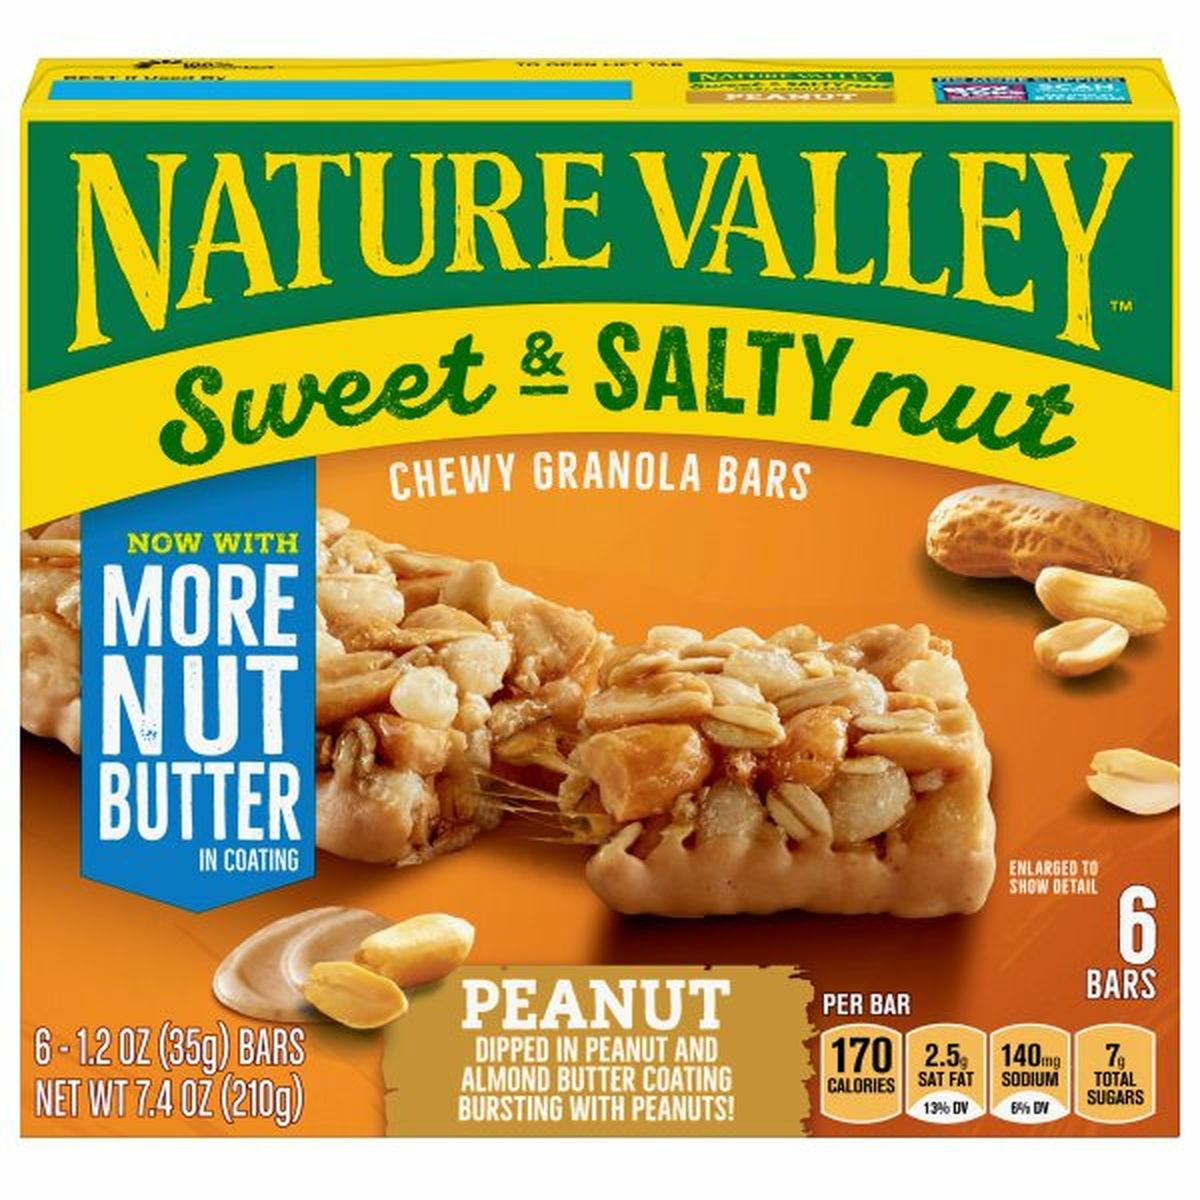 Calories in Nature Valley Granola Bars, Chewy, Peanut, Sweet & Salty Nut, 6 Pack